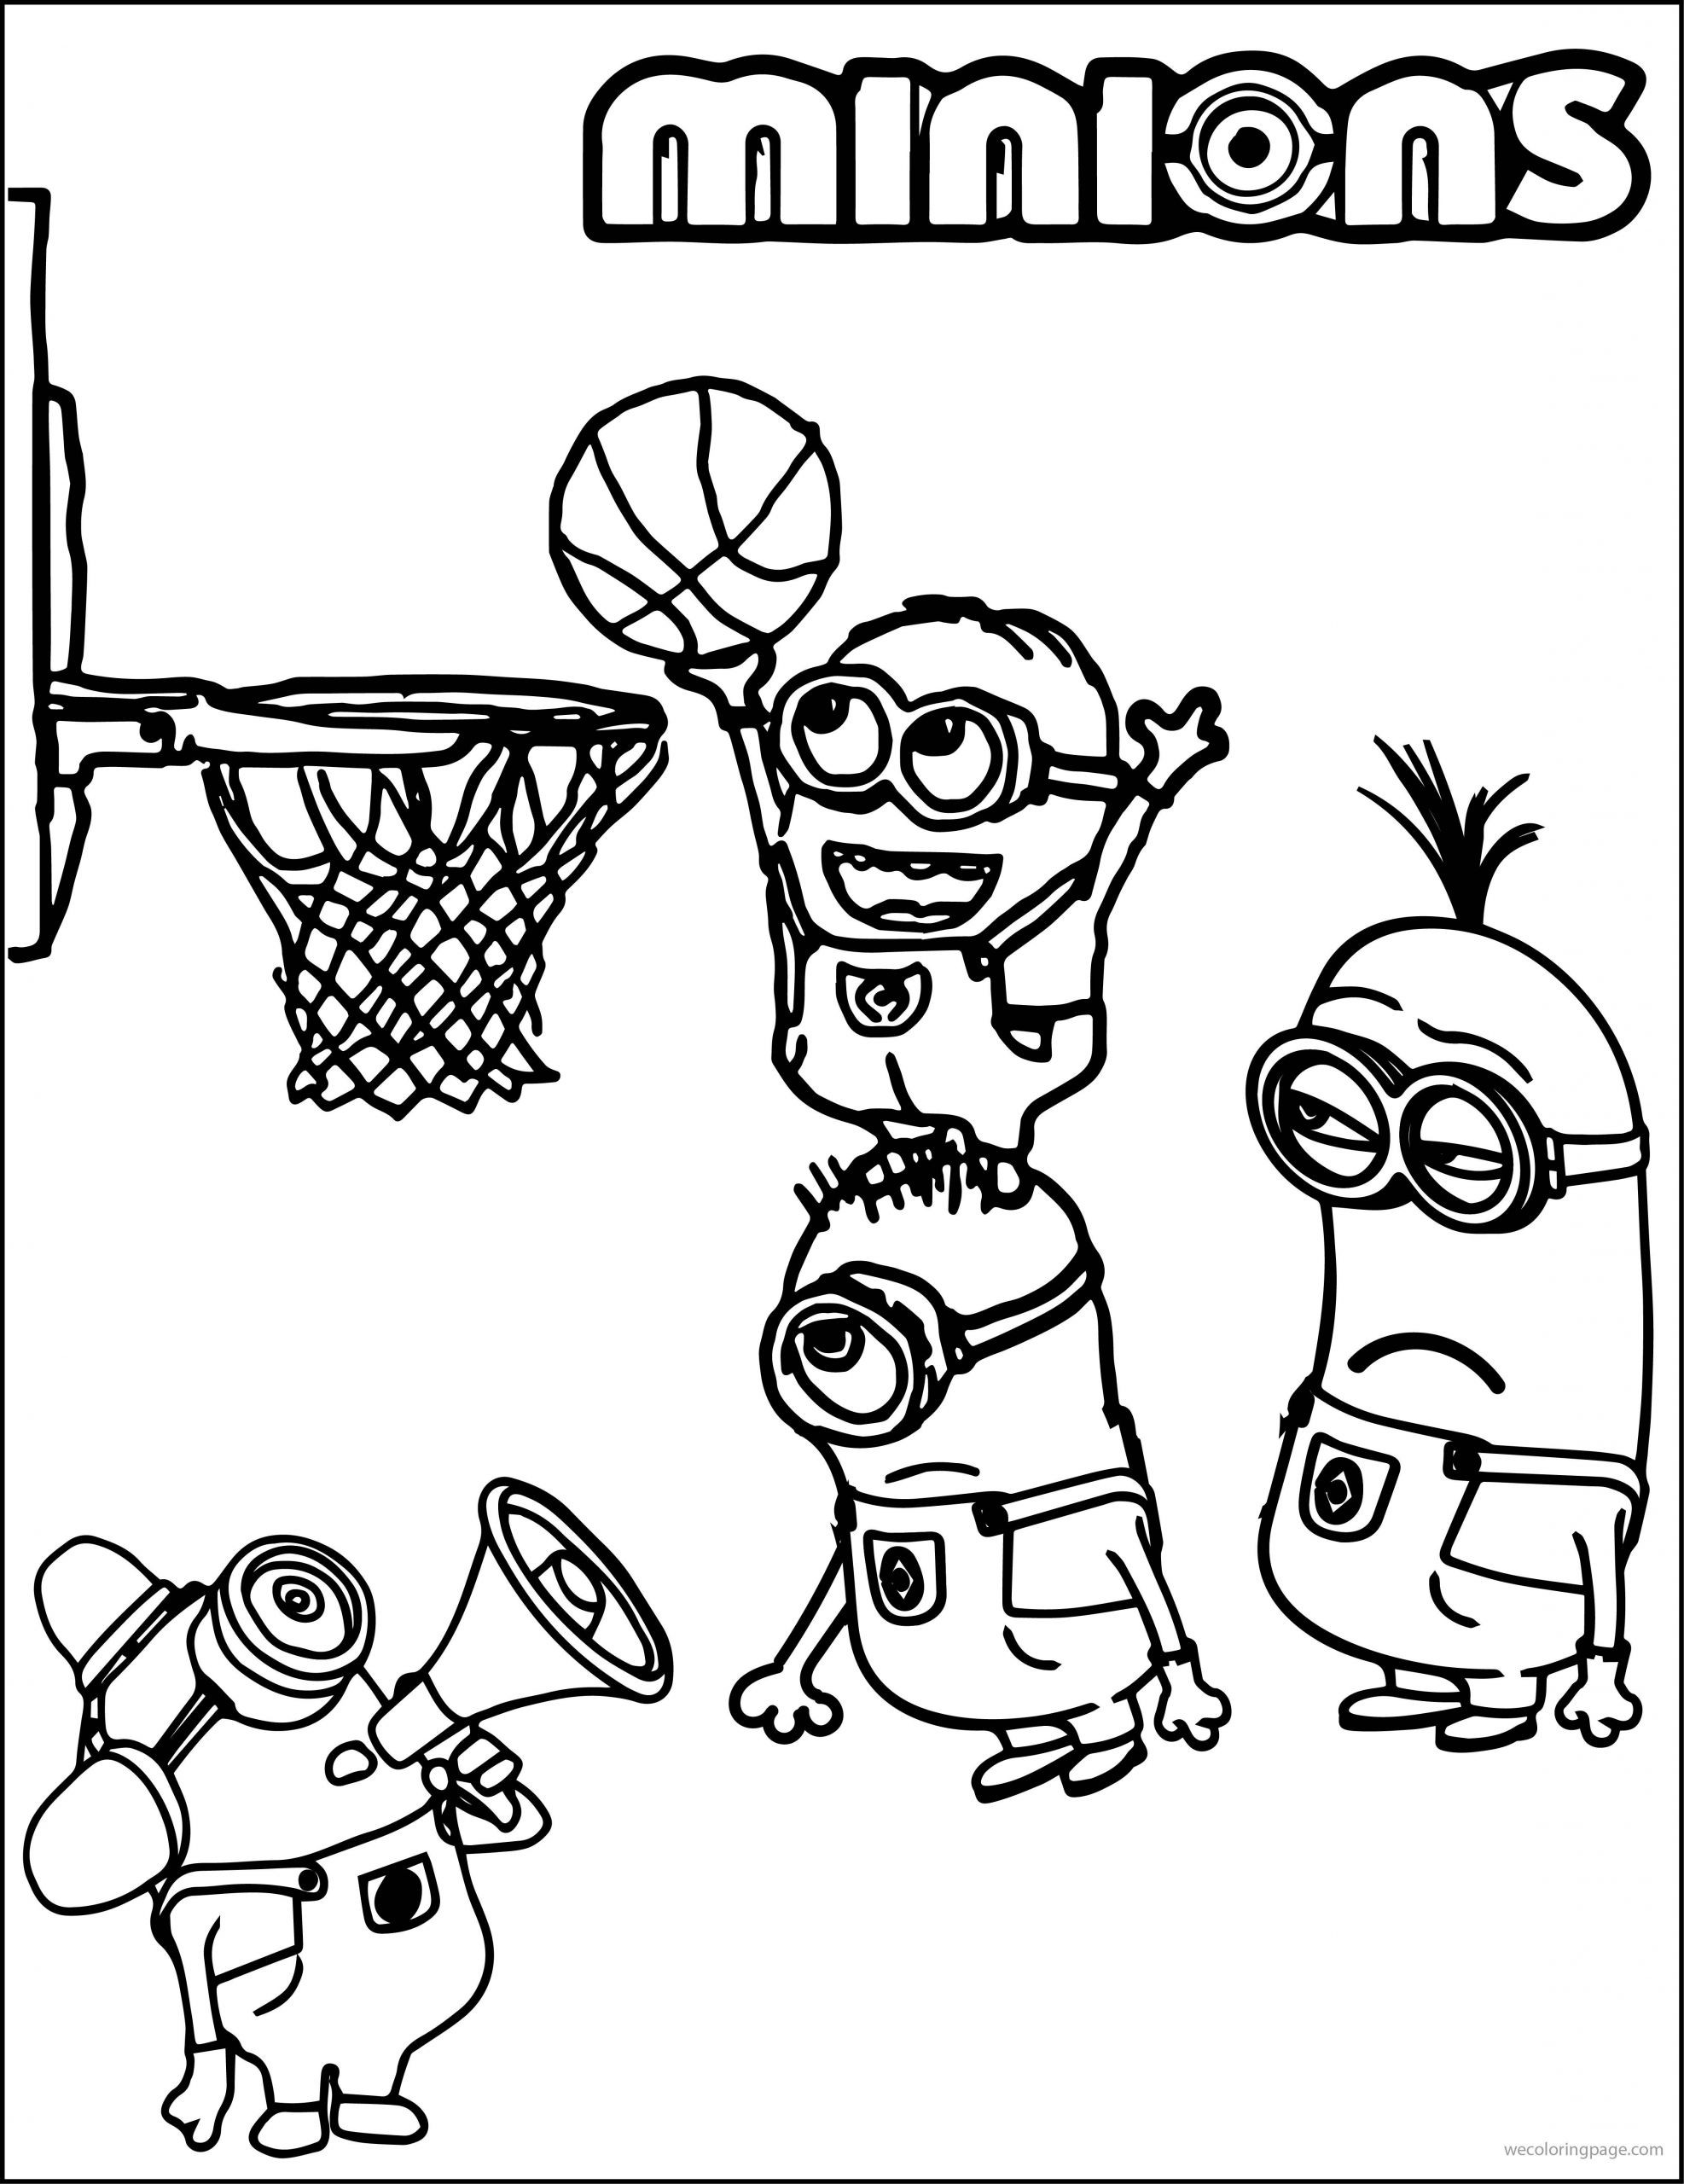 Coloring Pages For Boys Sports
 Minion Playing Basketball Coloring Pages